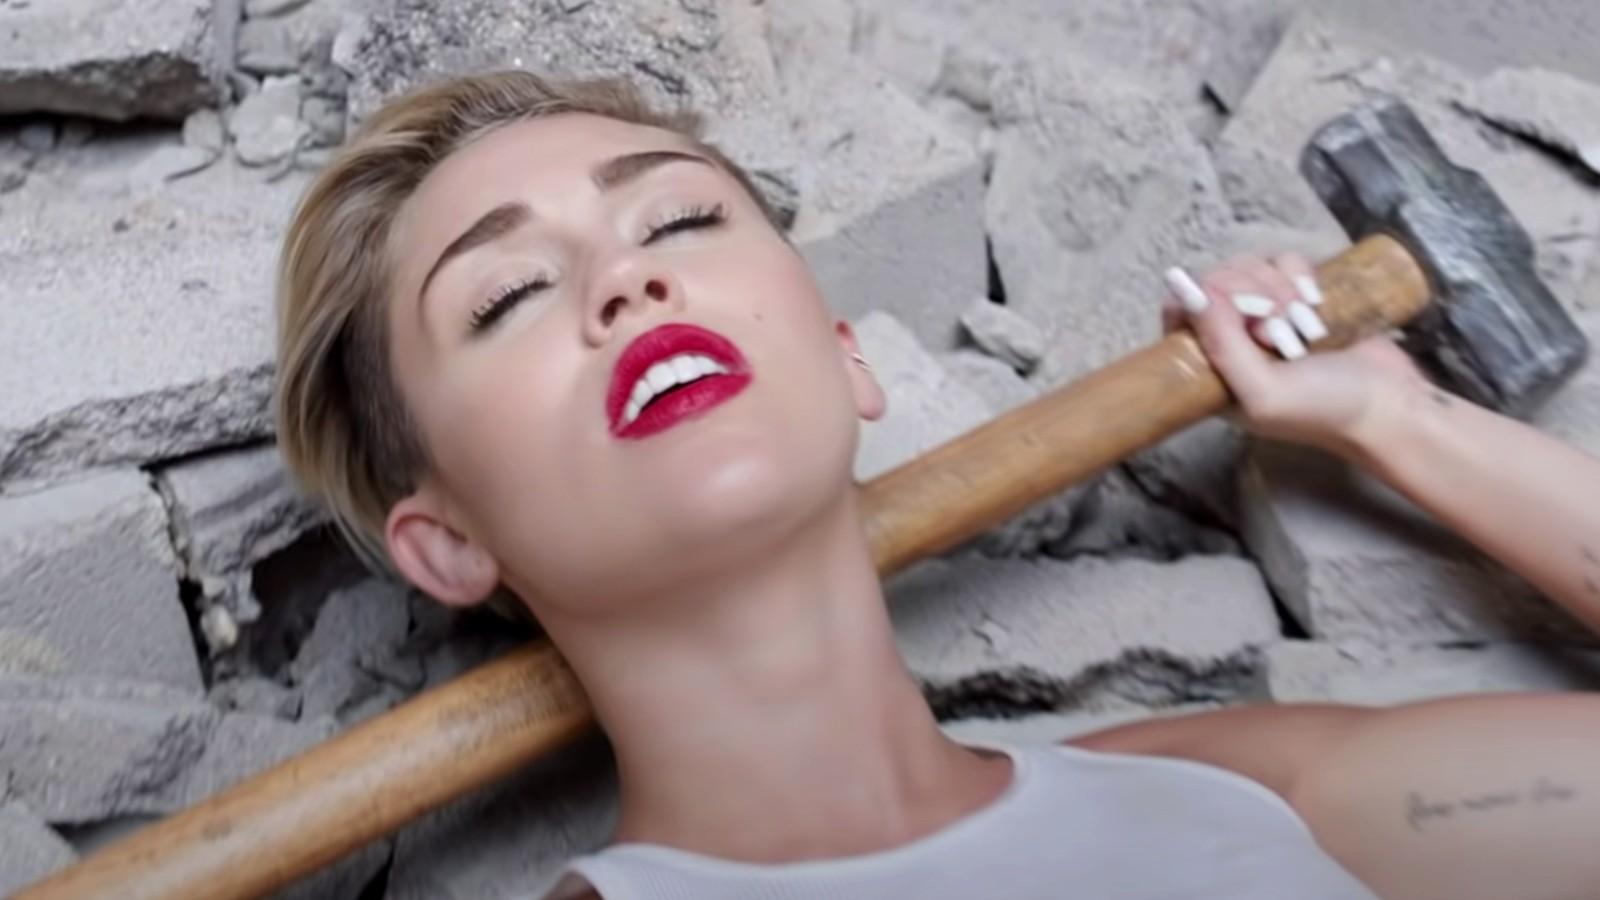 Miley Cyrus in her video for Wrecking Ball